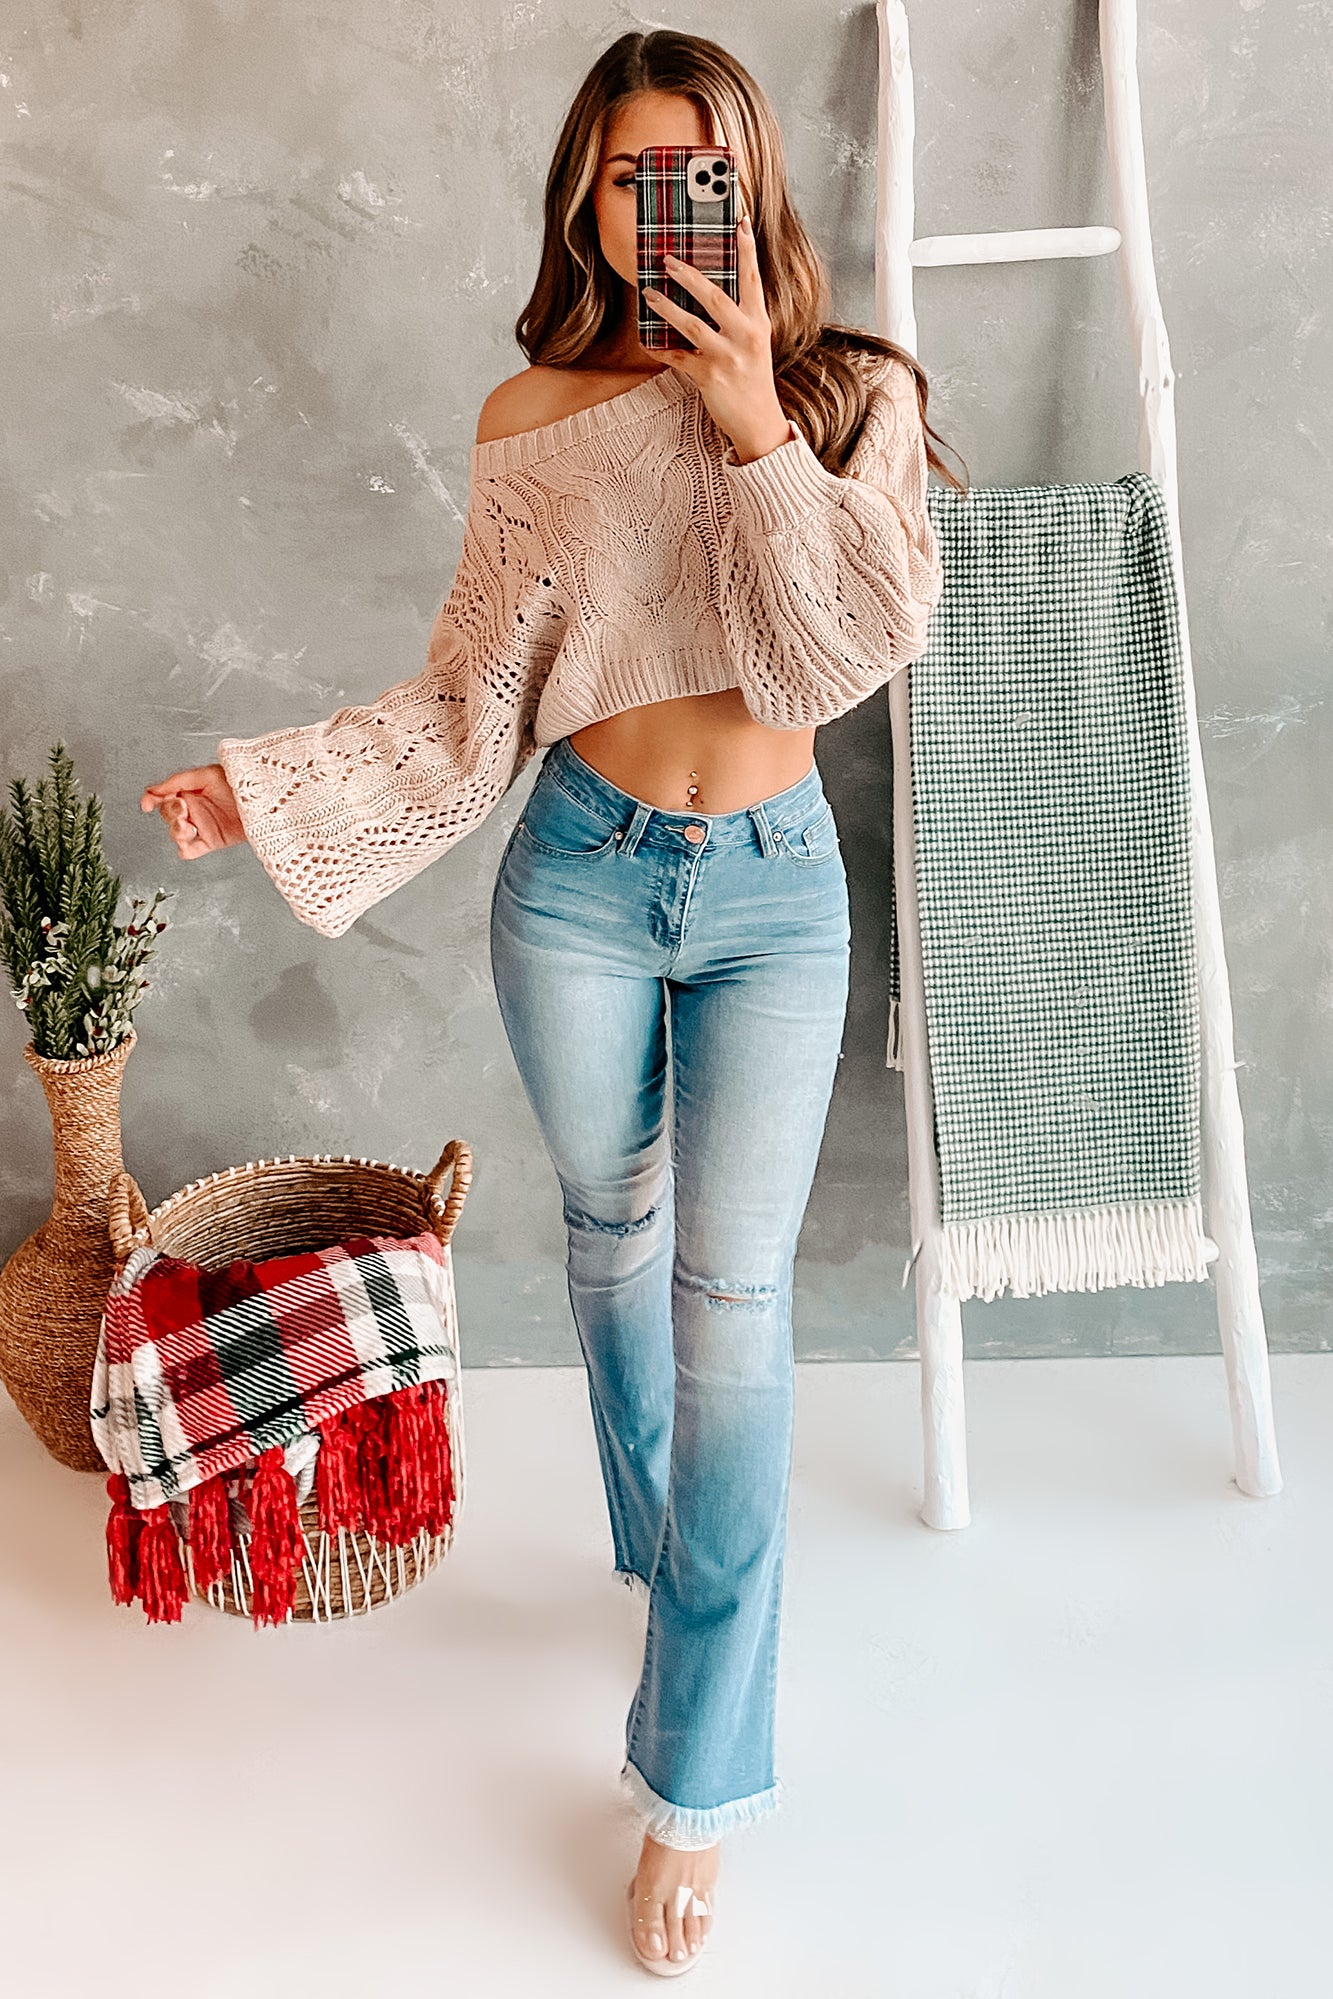 Exciting Opportunities Cropped Cable Knit Sweater (Blush) - NanaMacs